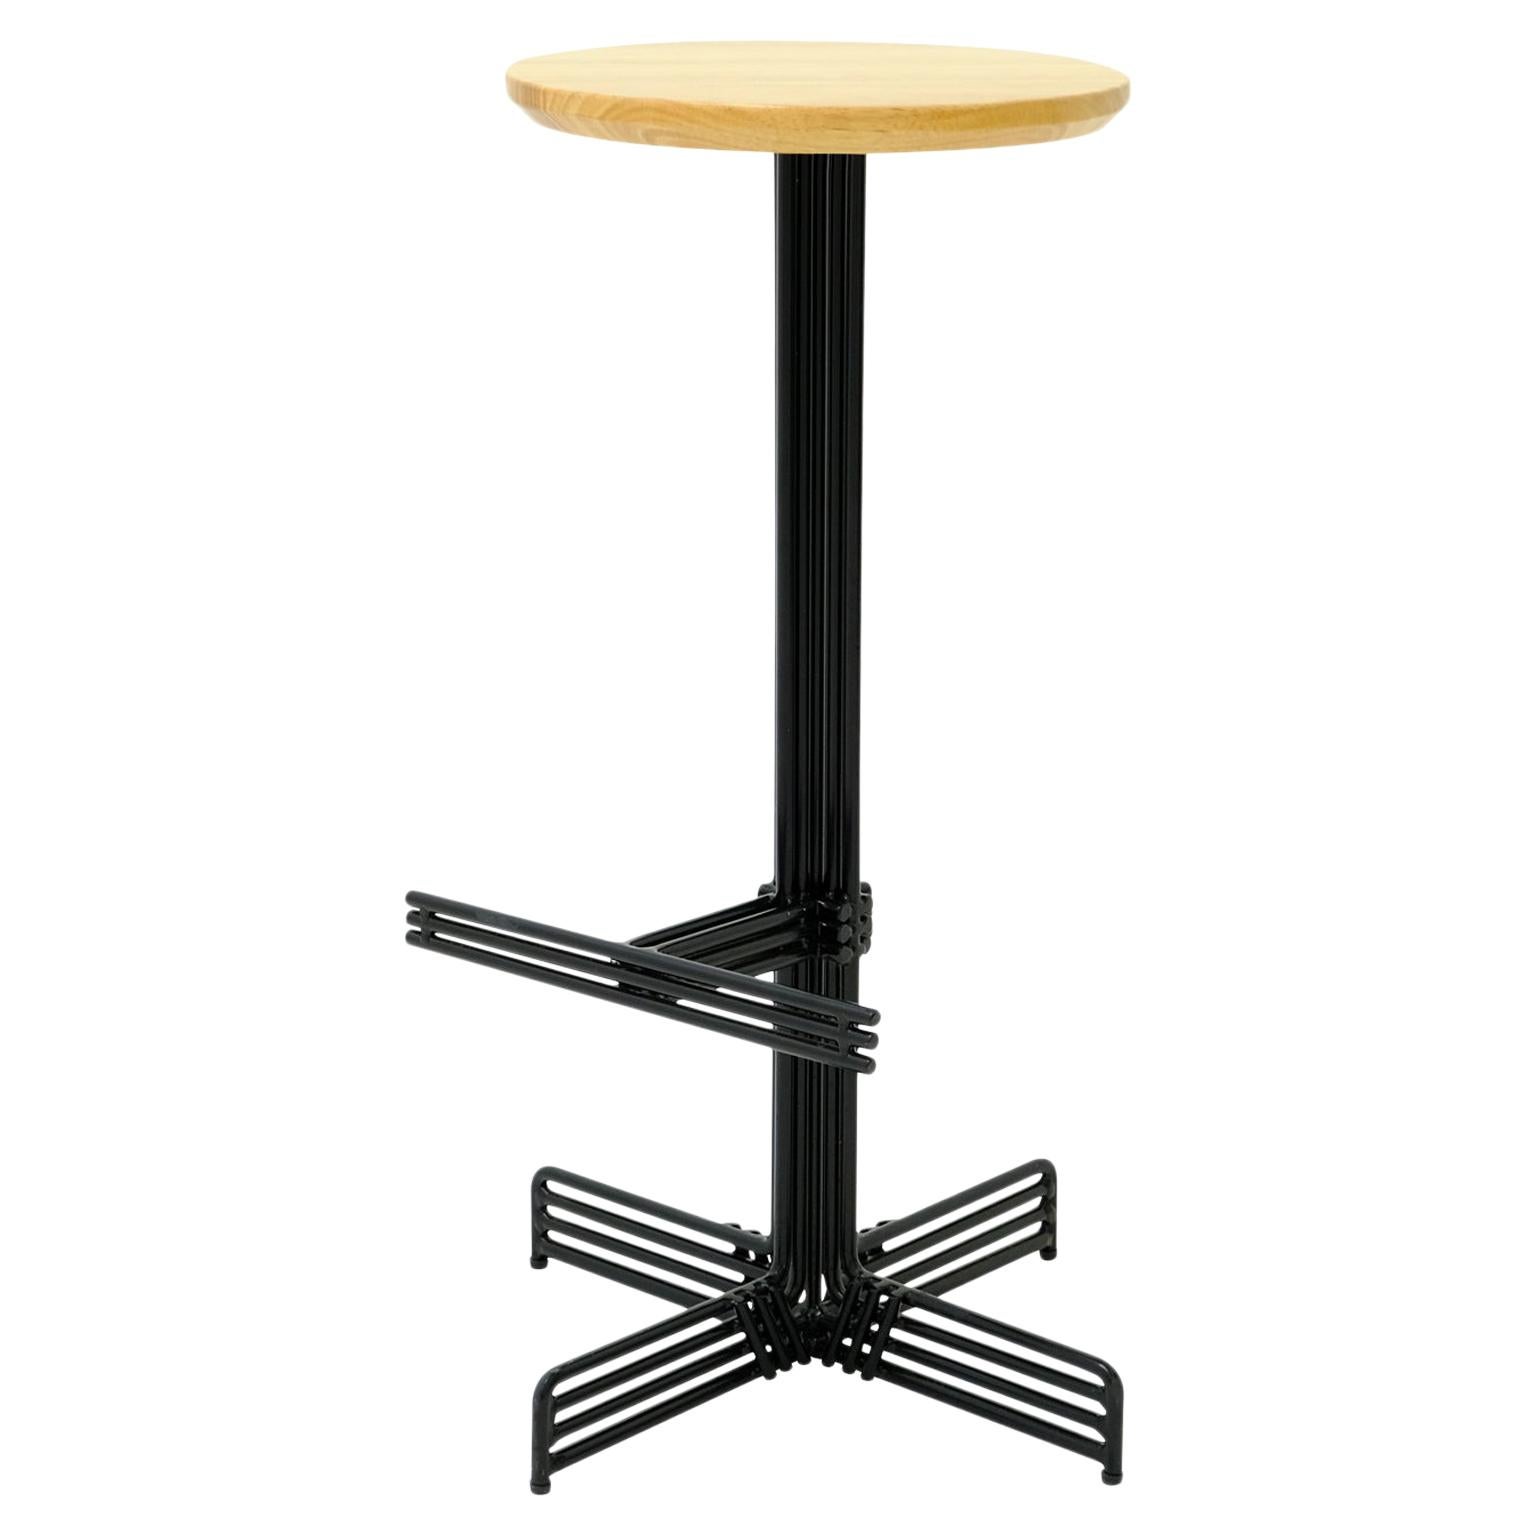 Metal Stick Barstool in Black by Bend Goods